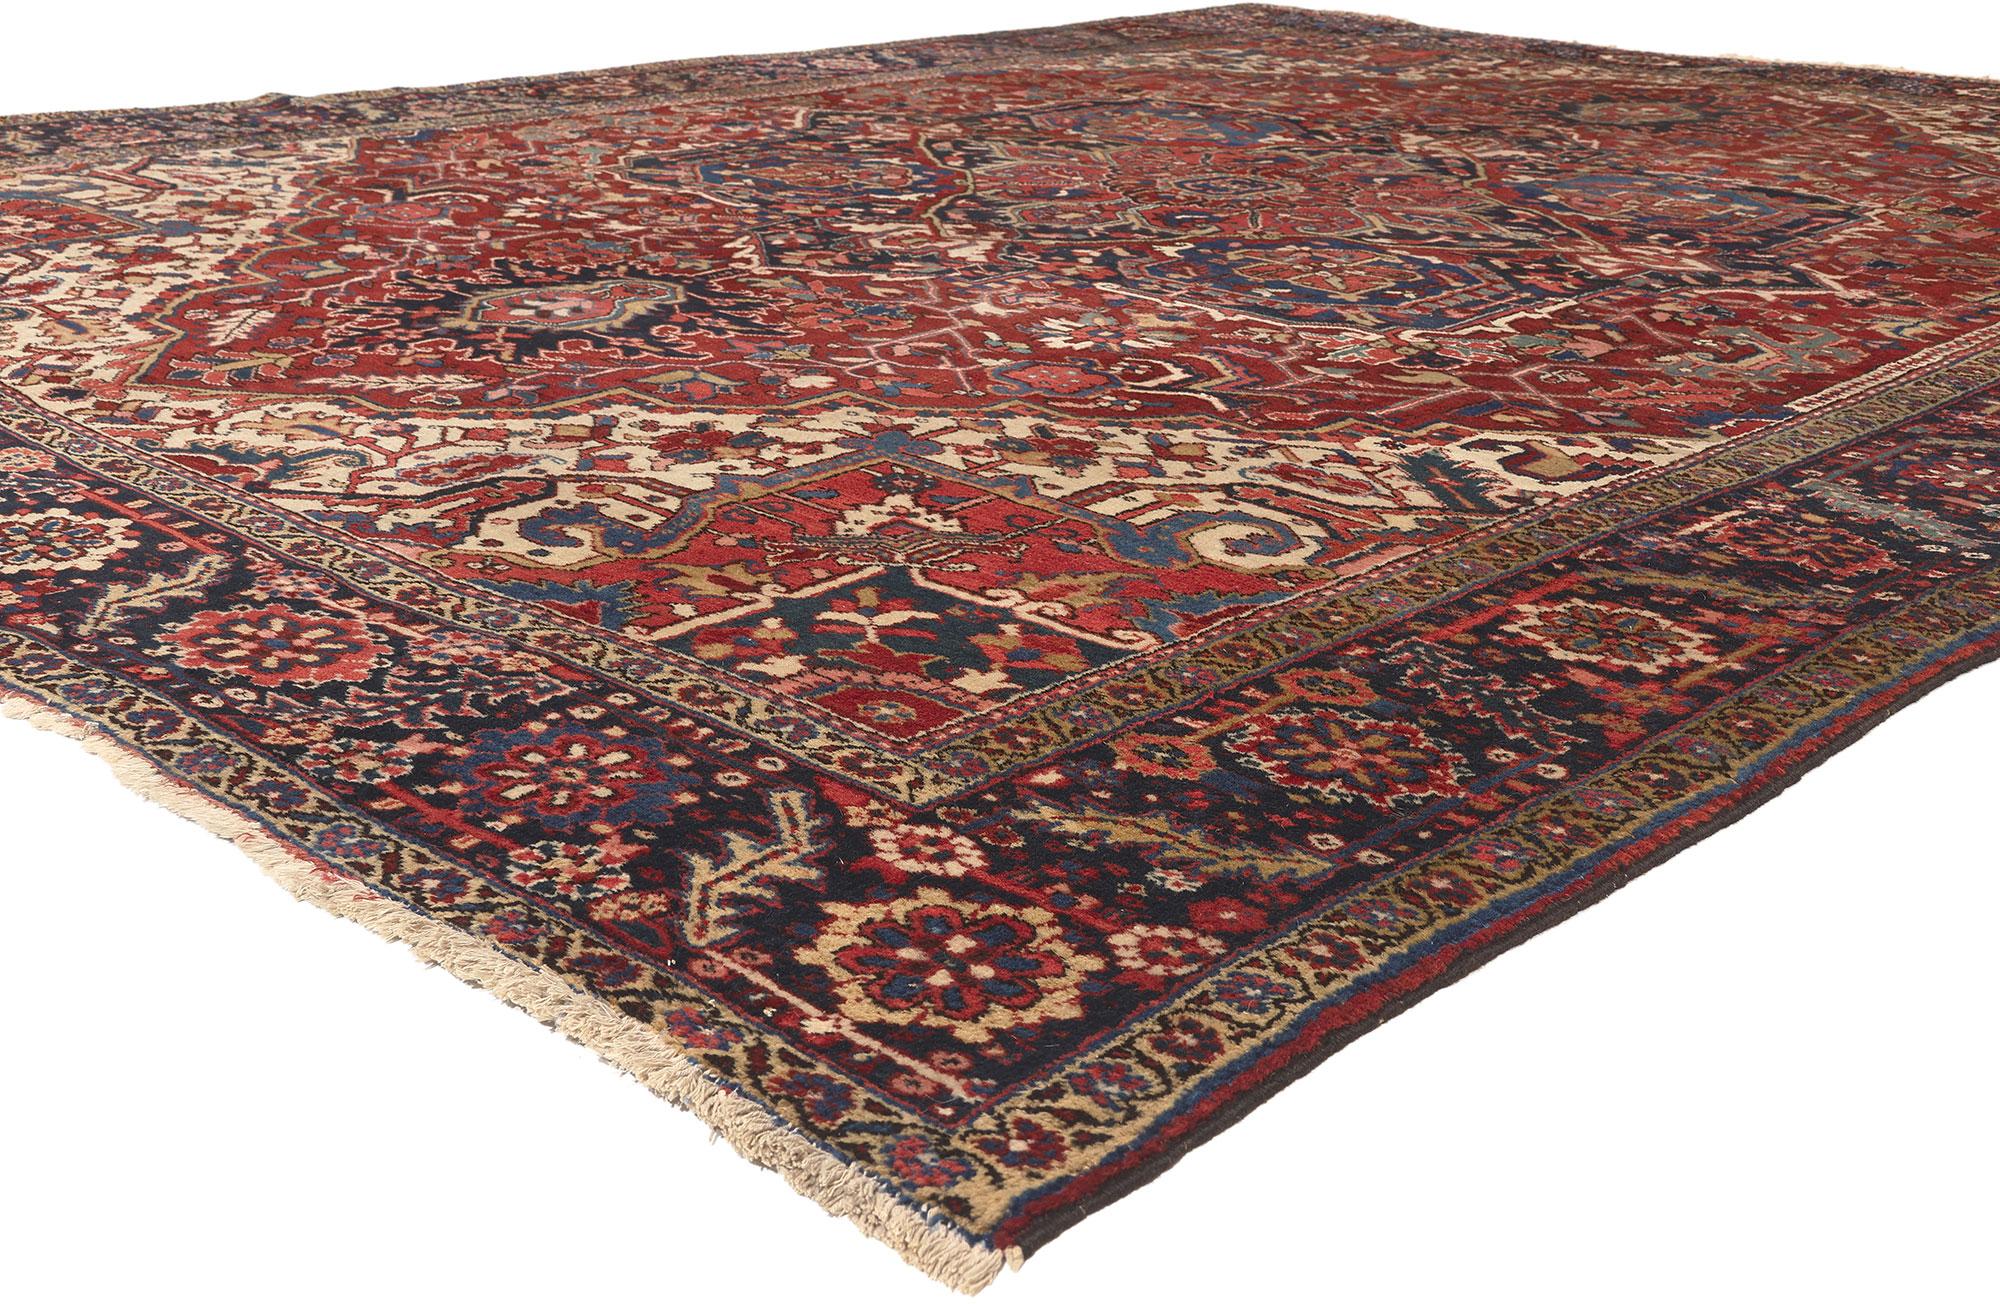 78633 Antique Persian Heriz Rug, 10'05 x 13'08.
Stylish durability meets patriotic panache in this hand knotted wool antique Persian Heriz rug. The intrinsic geometric design and traditional color palette woven into this piece work together creating